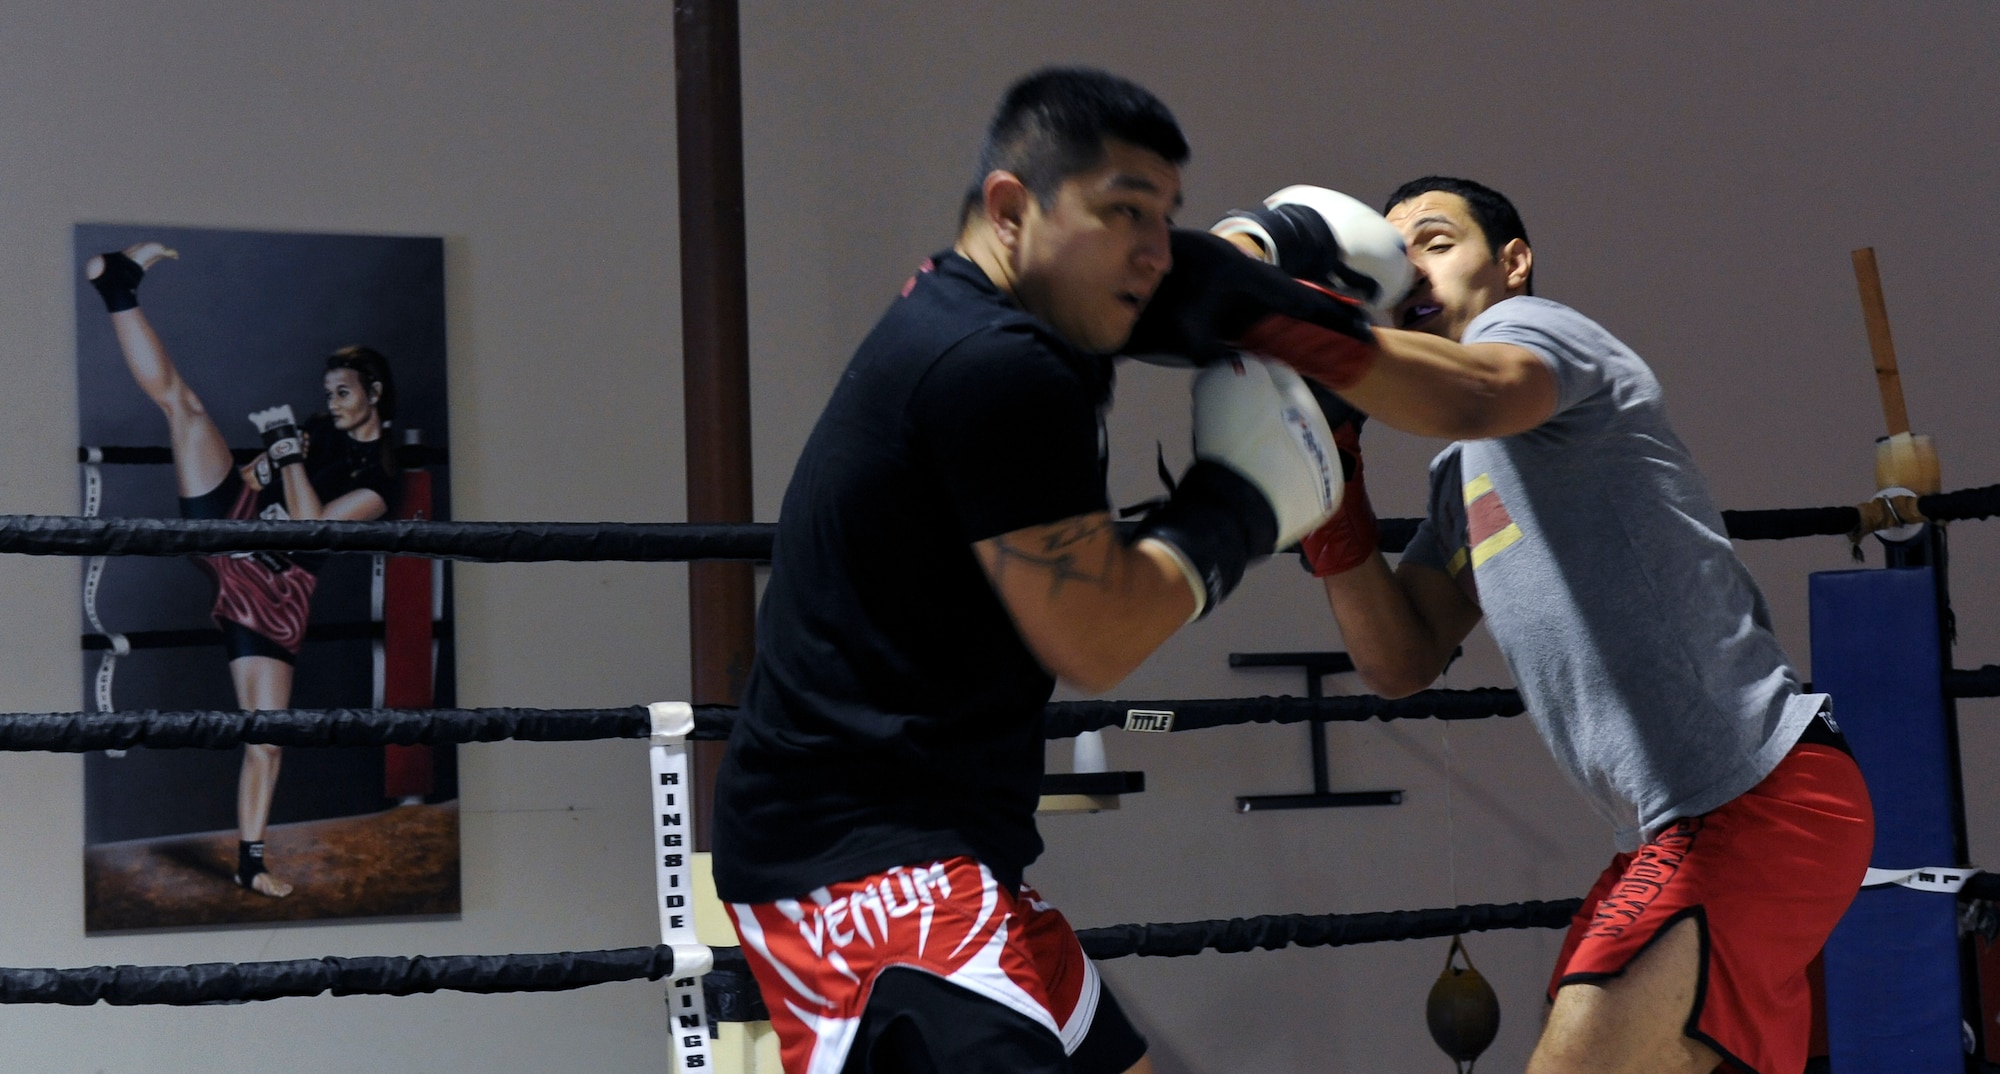 Staff Sgt. Jeremy Caudillo, left, and Airman 1st Class Justin Solorio, 2nd Force Support Squadron, trade punches during their sparring session at a local mixed martial arts gym in Bossier City, La., Dec. 12. Sparring helps fighters hone their timing, control their distance, speed, foot work, endurance, speed, and focus. Both Caudillo and Solorio work at the Fitness Center on Barksdale Air Force Base, La., and enjoy training and competing in MMA competitions. (U.S. Air Force photo/Senior Airman Micaiah Anthony)
